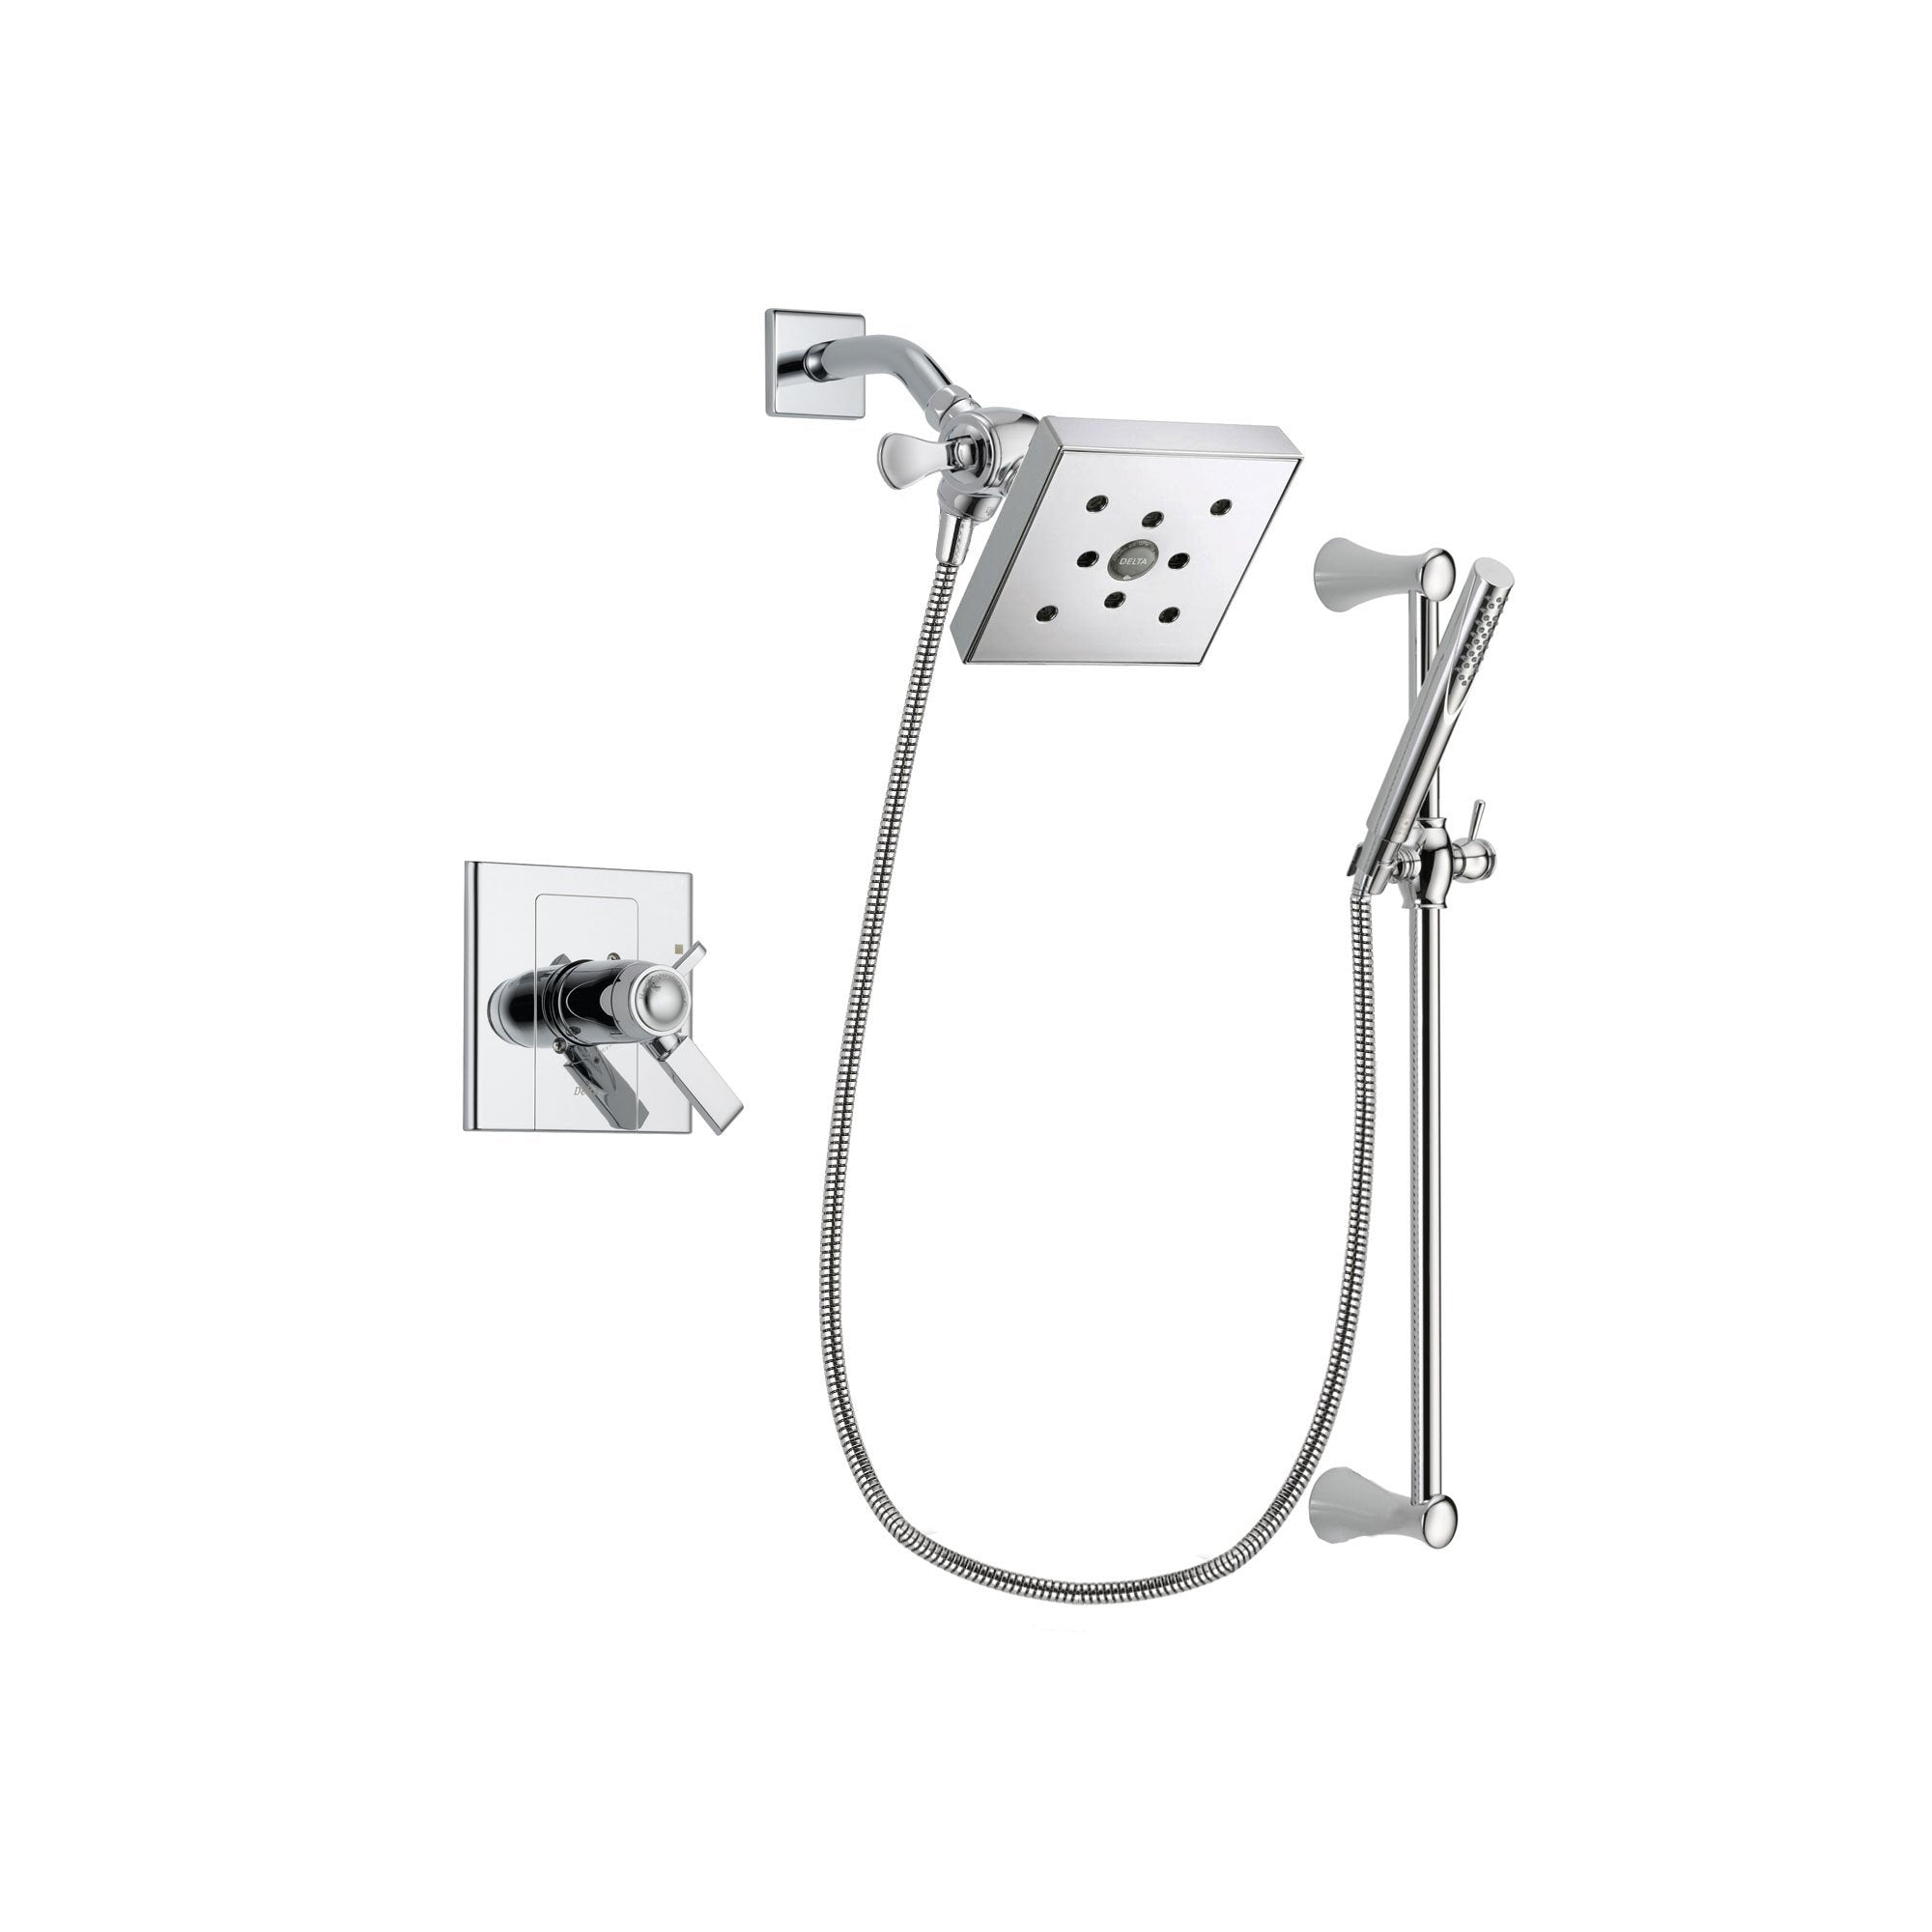 Delta Arzo Chrome Finish Thermostatic Shower Faucet System Package with Square Shower Head and Modern Wall Mount Slide Bar with Handheld Shower Spray Includes Rough-in Valve DSP0277V